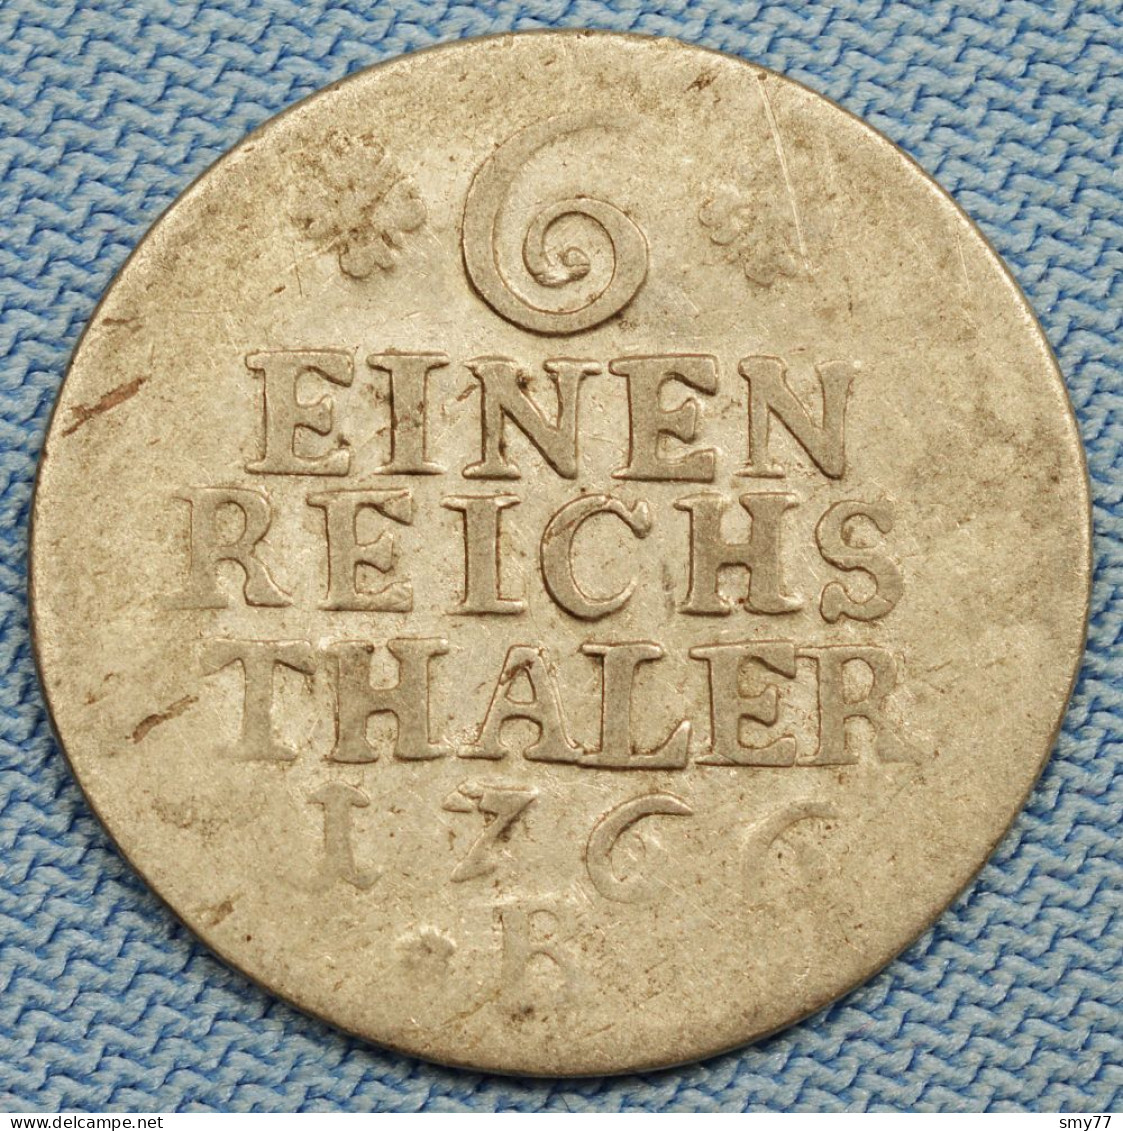 Preussen / Prussia • 1/6 Thaler 1766 B • Friedrich II• Breslau • German States / Allemagne États / Prusse • [24-638] - Small Coins & Other Subdivisions